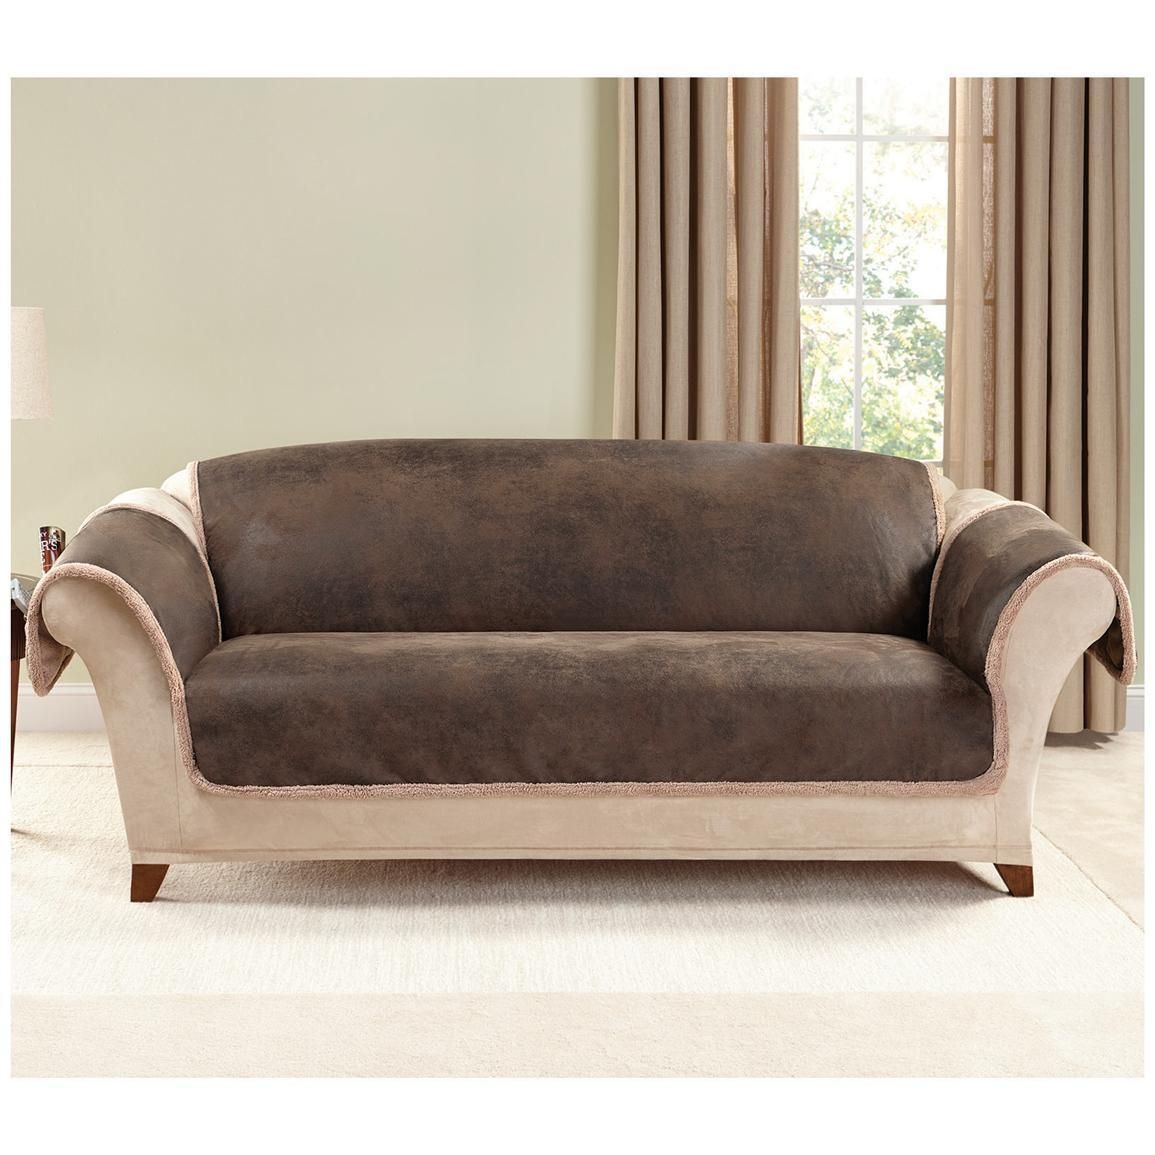 Sure Fit® Leather Furn Friend Sofa Slipcover – 581243, Furniture Throughout Slipcover For Leather Sofas (View 4 of 20)